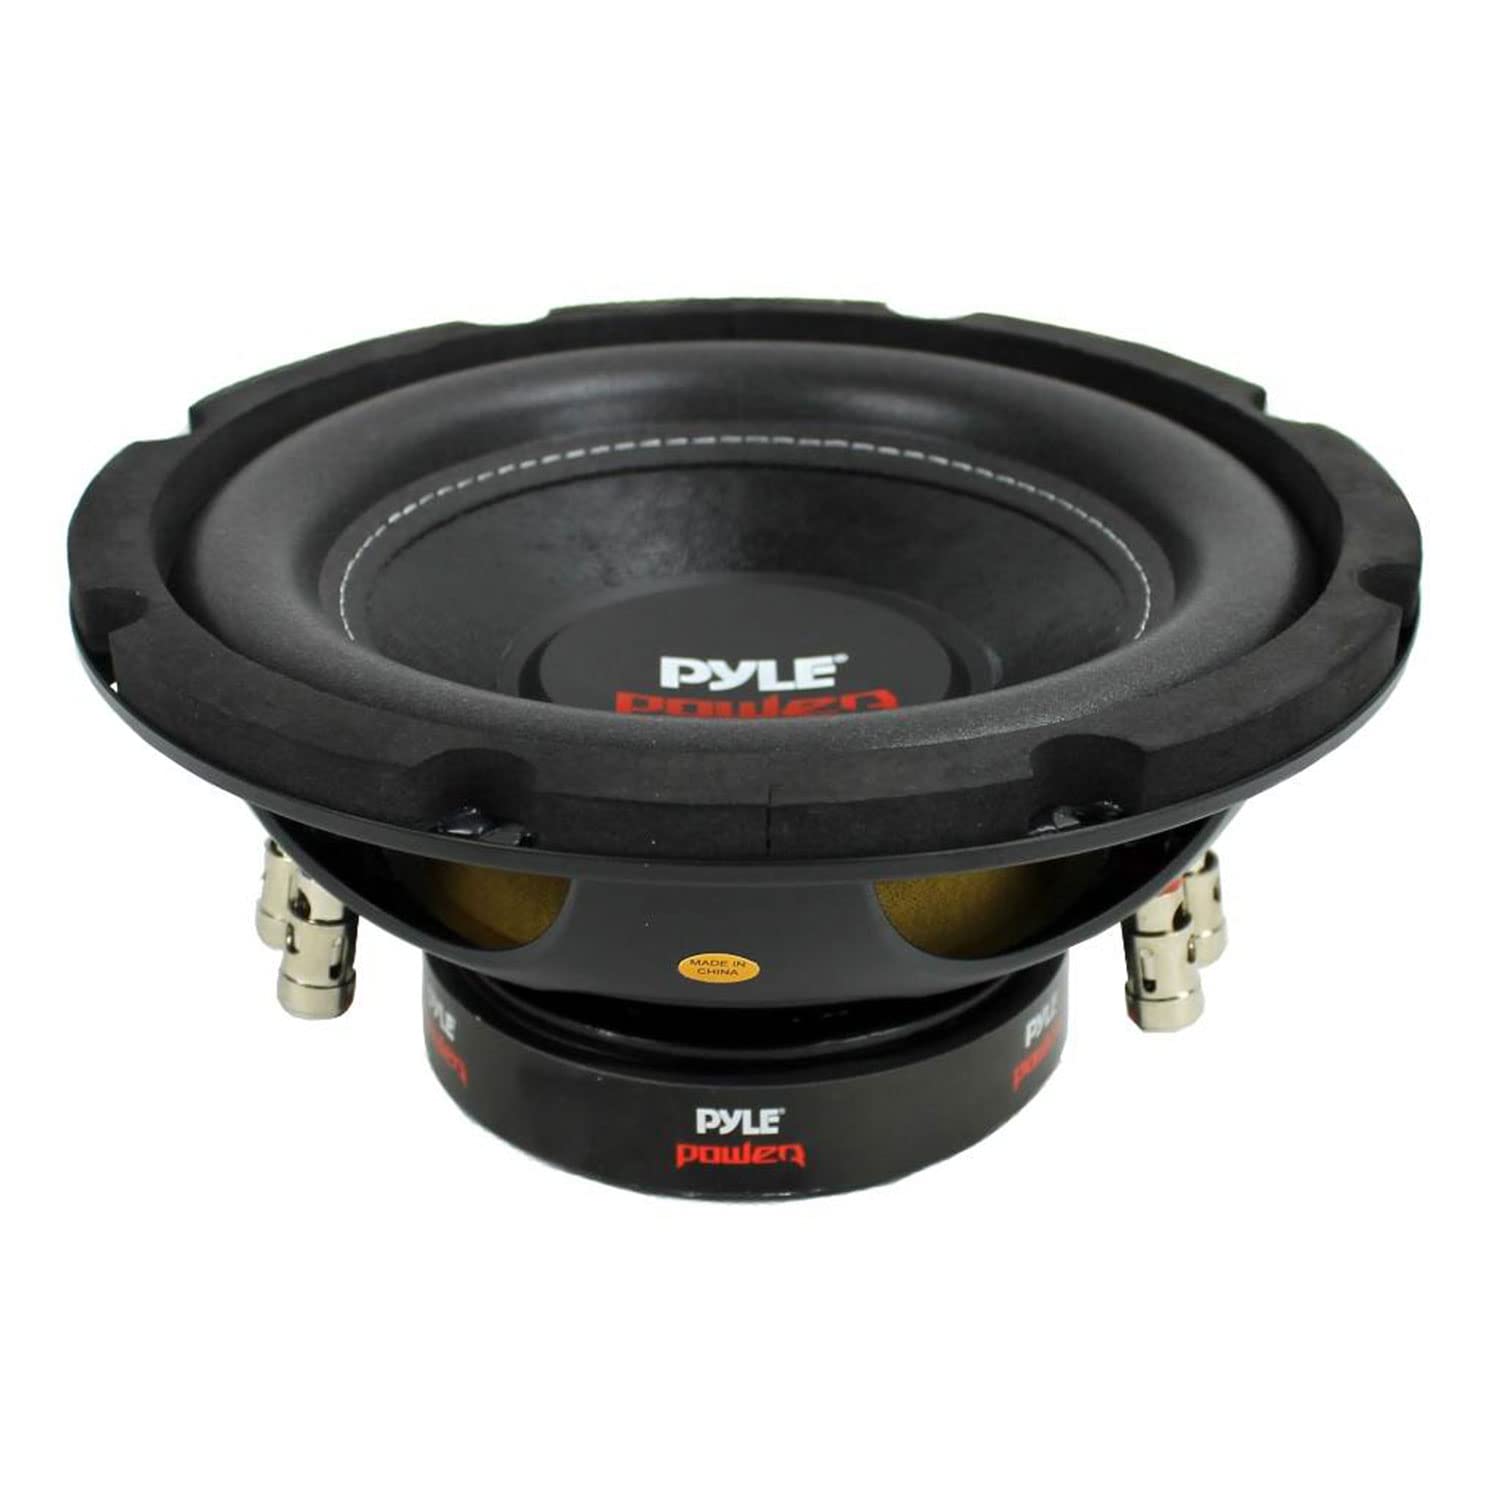 Pyle Car Subwoofer Audio Speaker - 8in Non-Pressed Paper Cone, Black Plastic Basket, Dual Voice Coil 4 Ohm Impedance, 800 Watt Power and Foam Surround for Vehicle Stereo Sound System - PLPW8D